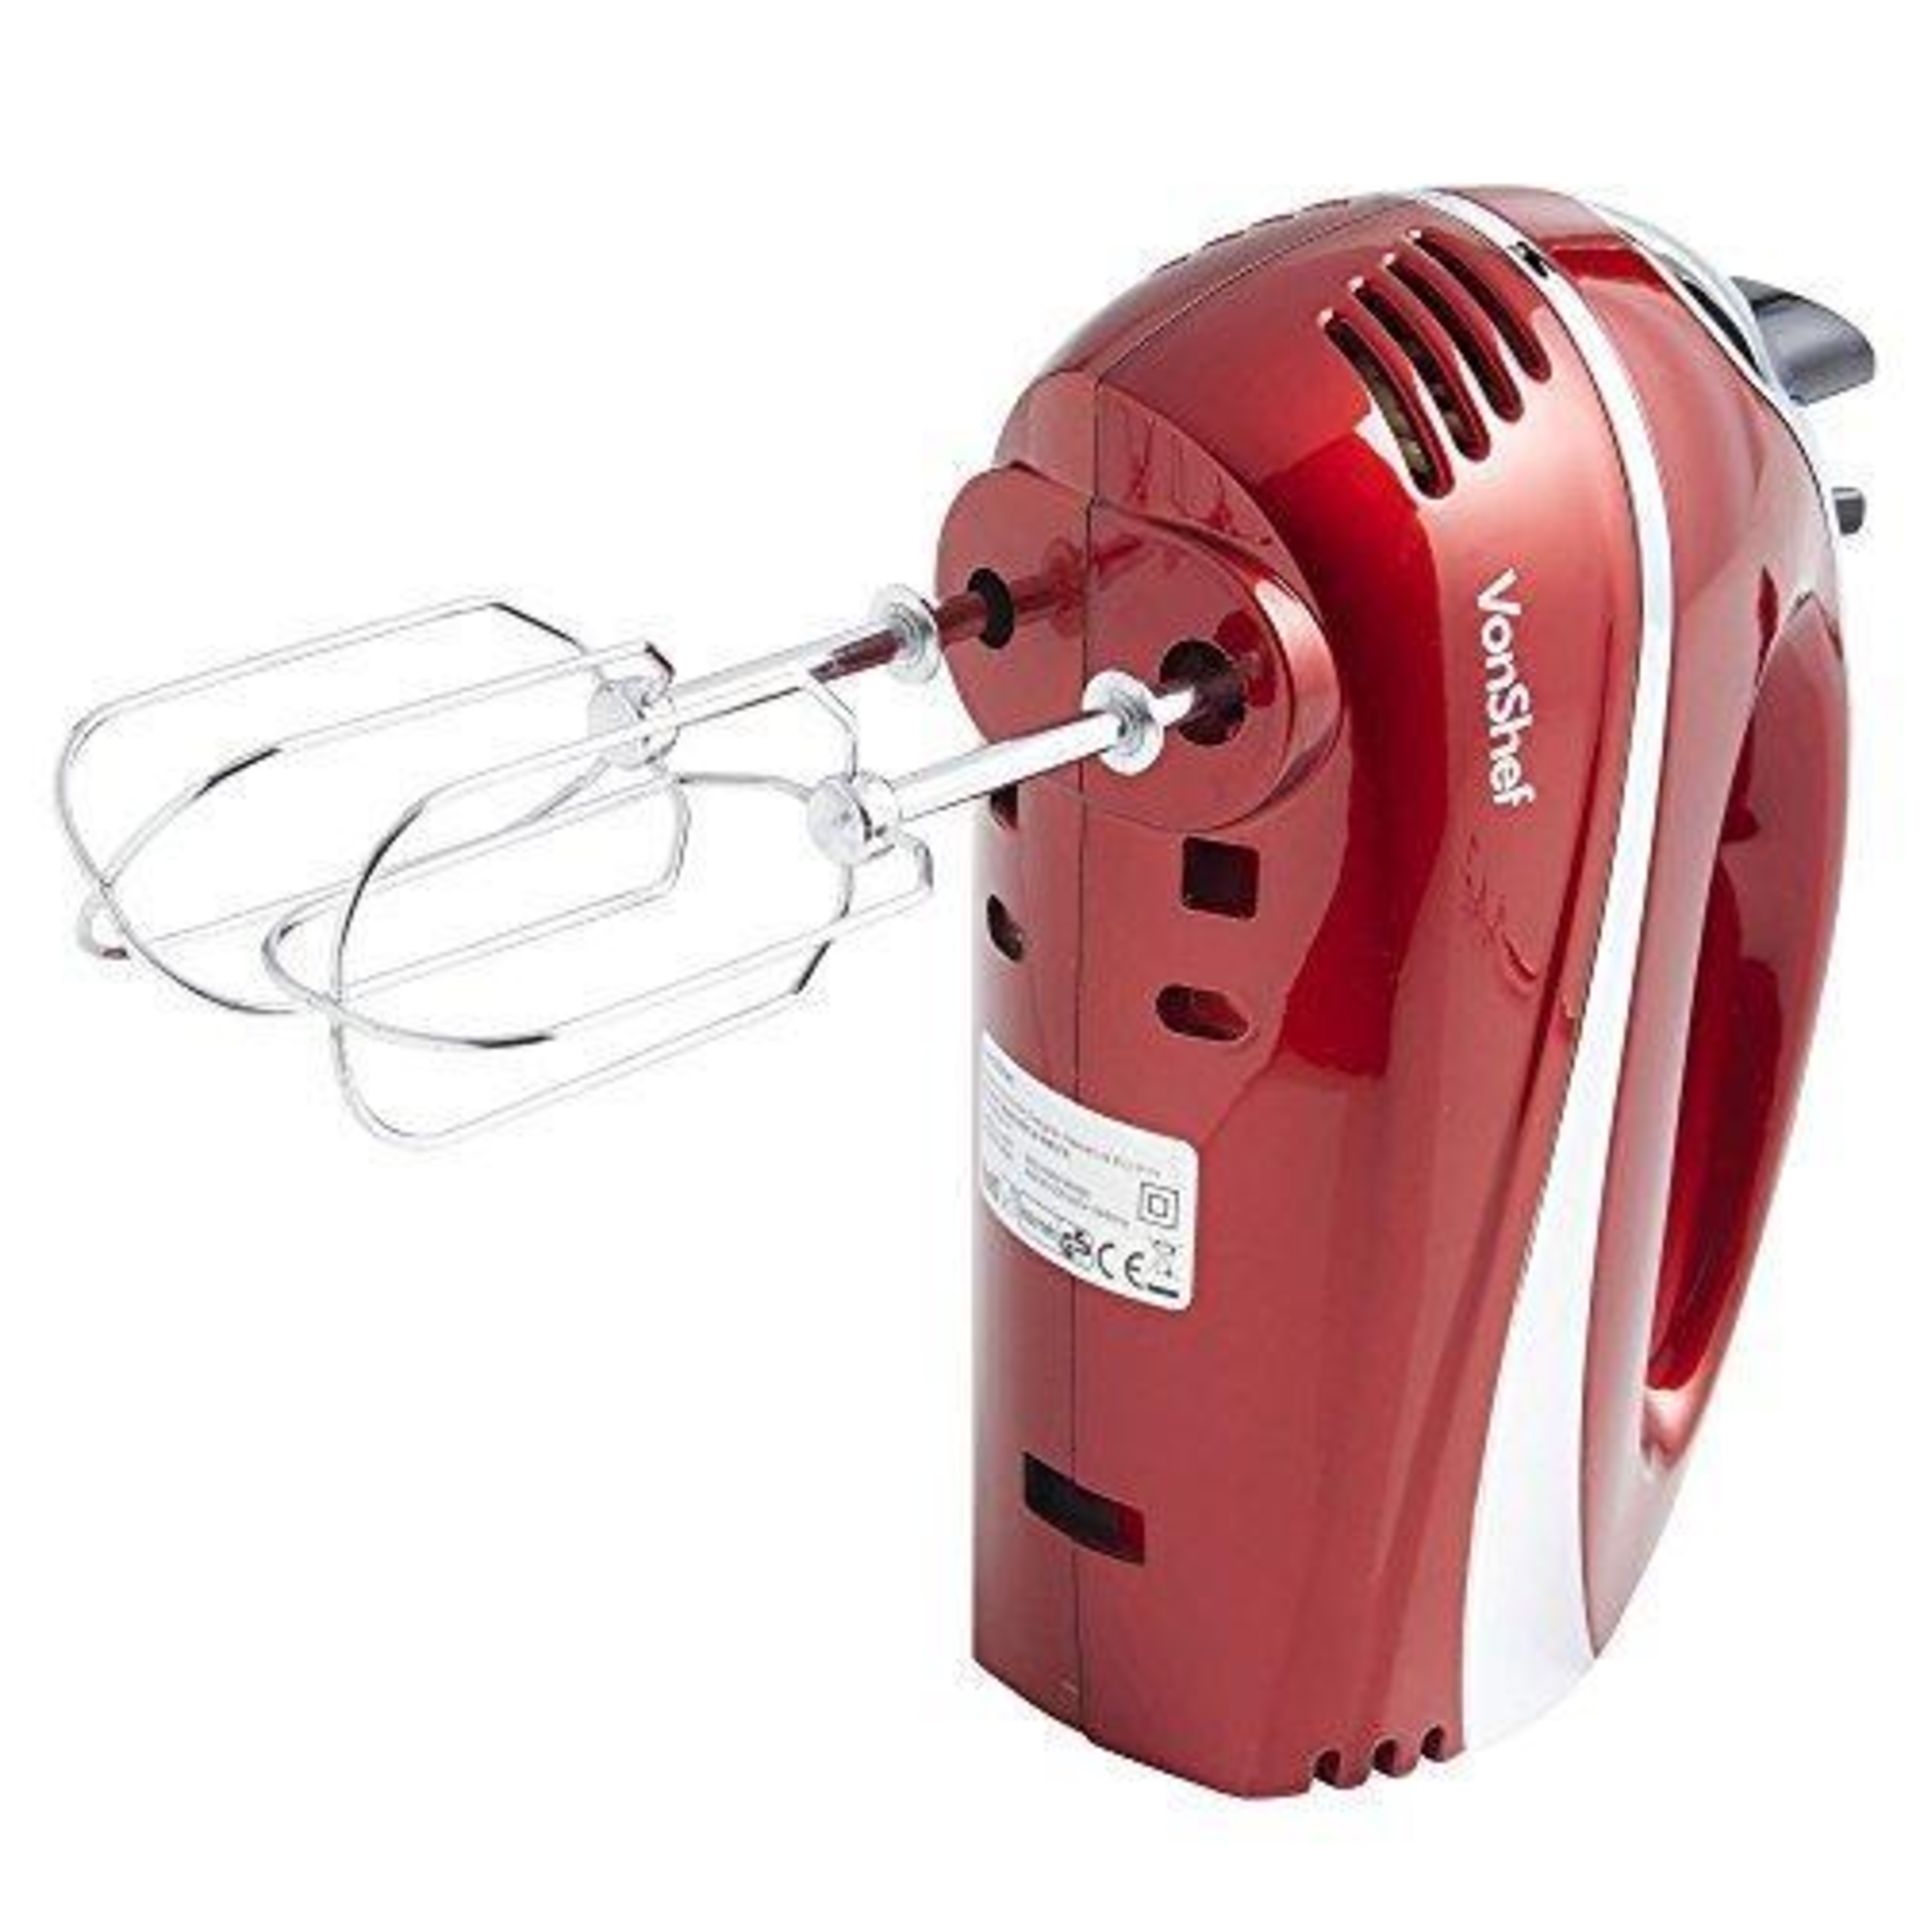 300W Red Hand Mixer - ER51. VonShef Red Hand WhiskThis is the ultimate kitchen appliance if you love - Image 4 of 4